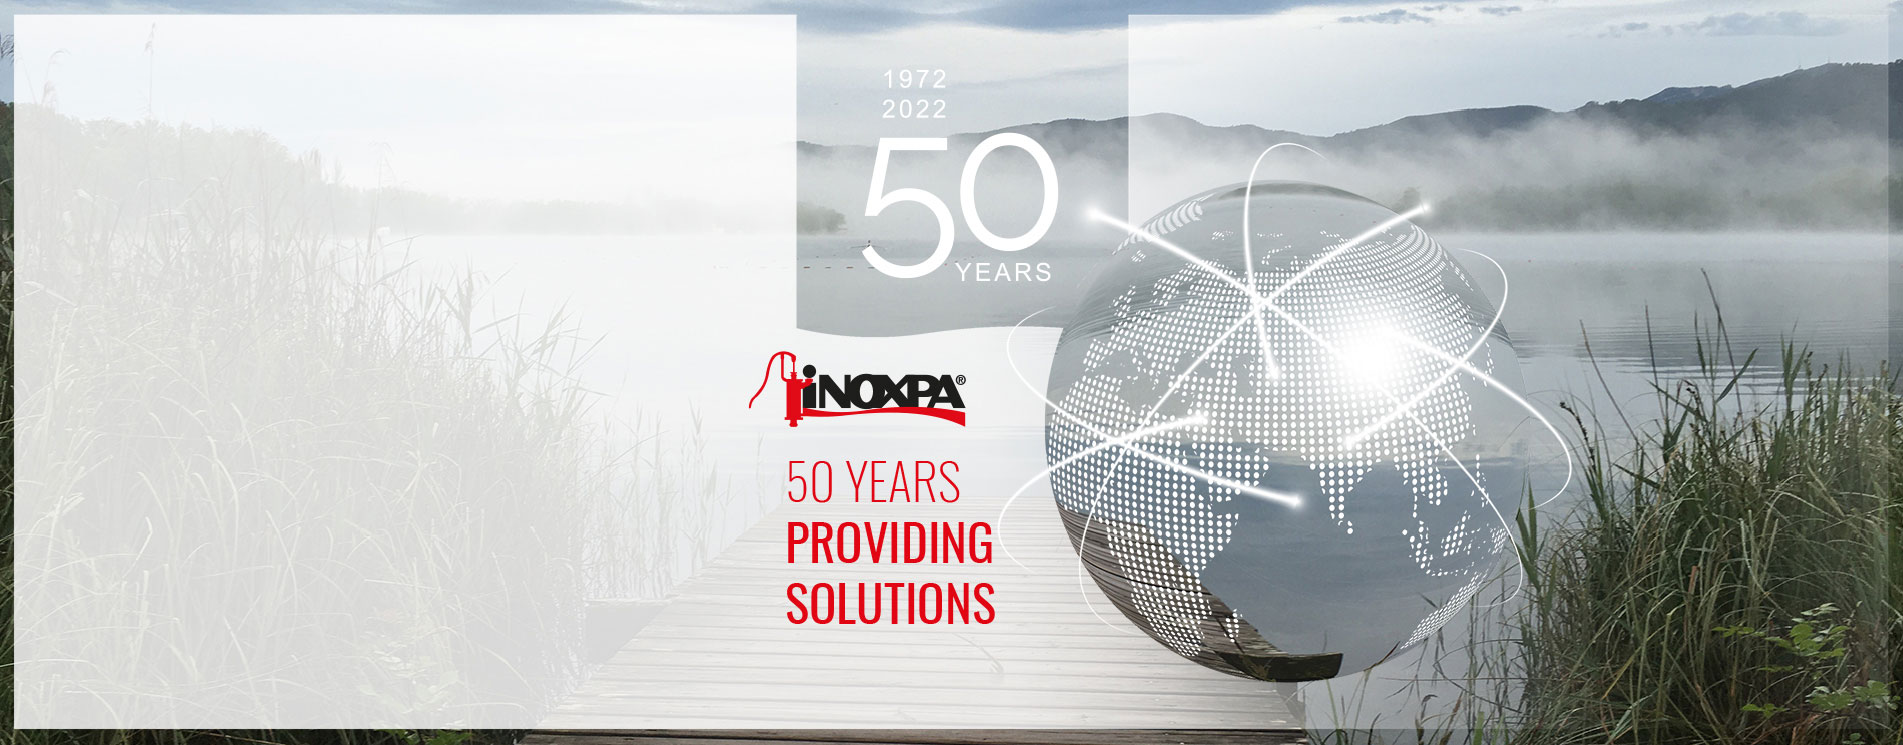 50 YEARS PROVIDING SOLUTIONS